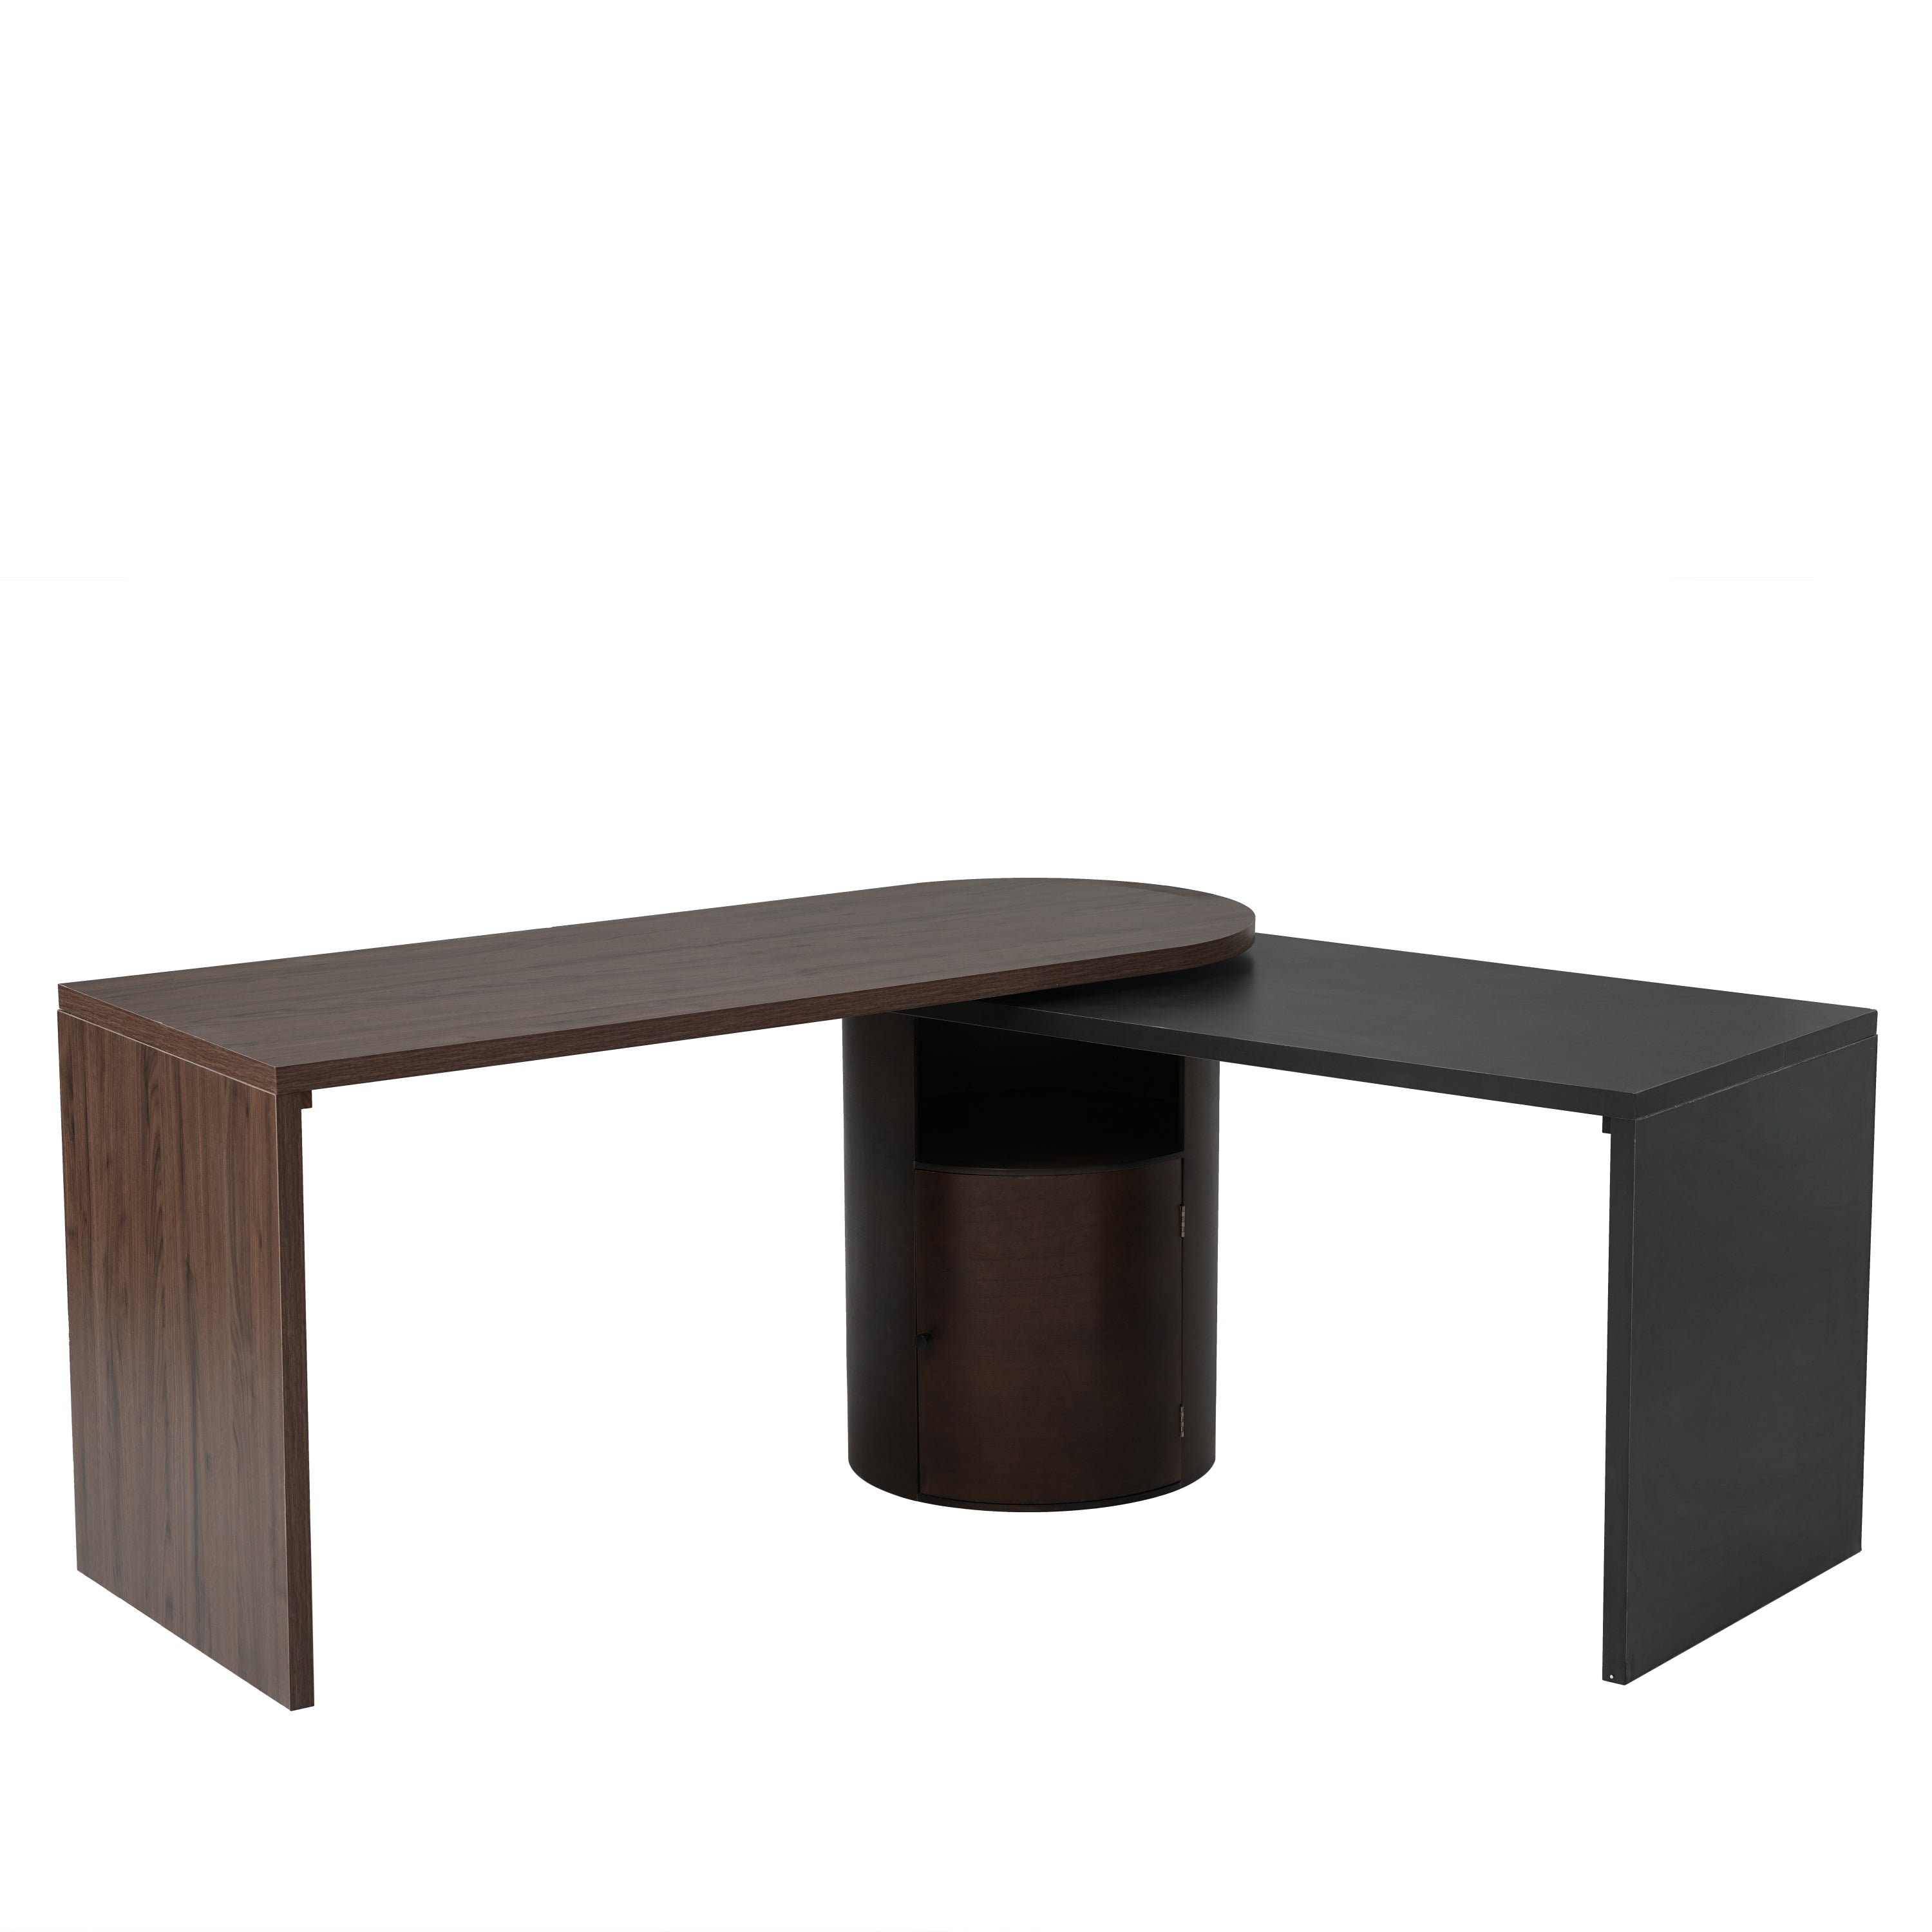 Modern L Shaped Desk in Walnut with 1 Cabinet and Open storage, 360° Wood Rotating Desk 56.92"  - Walnut